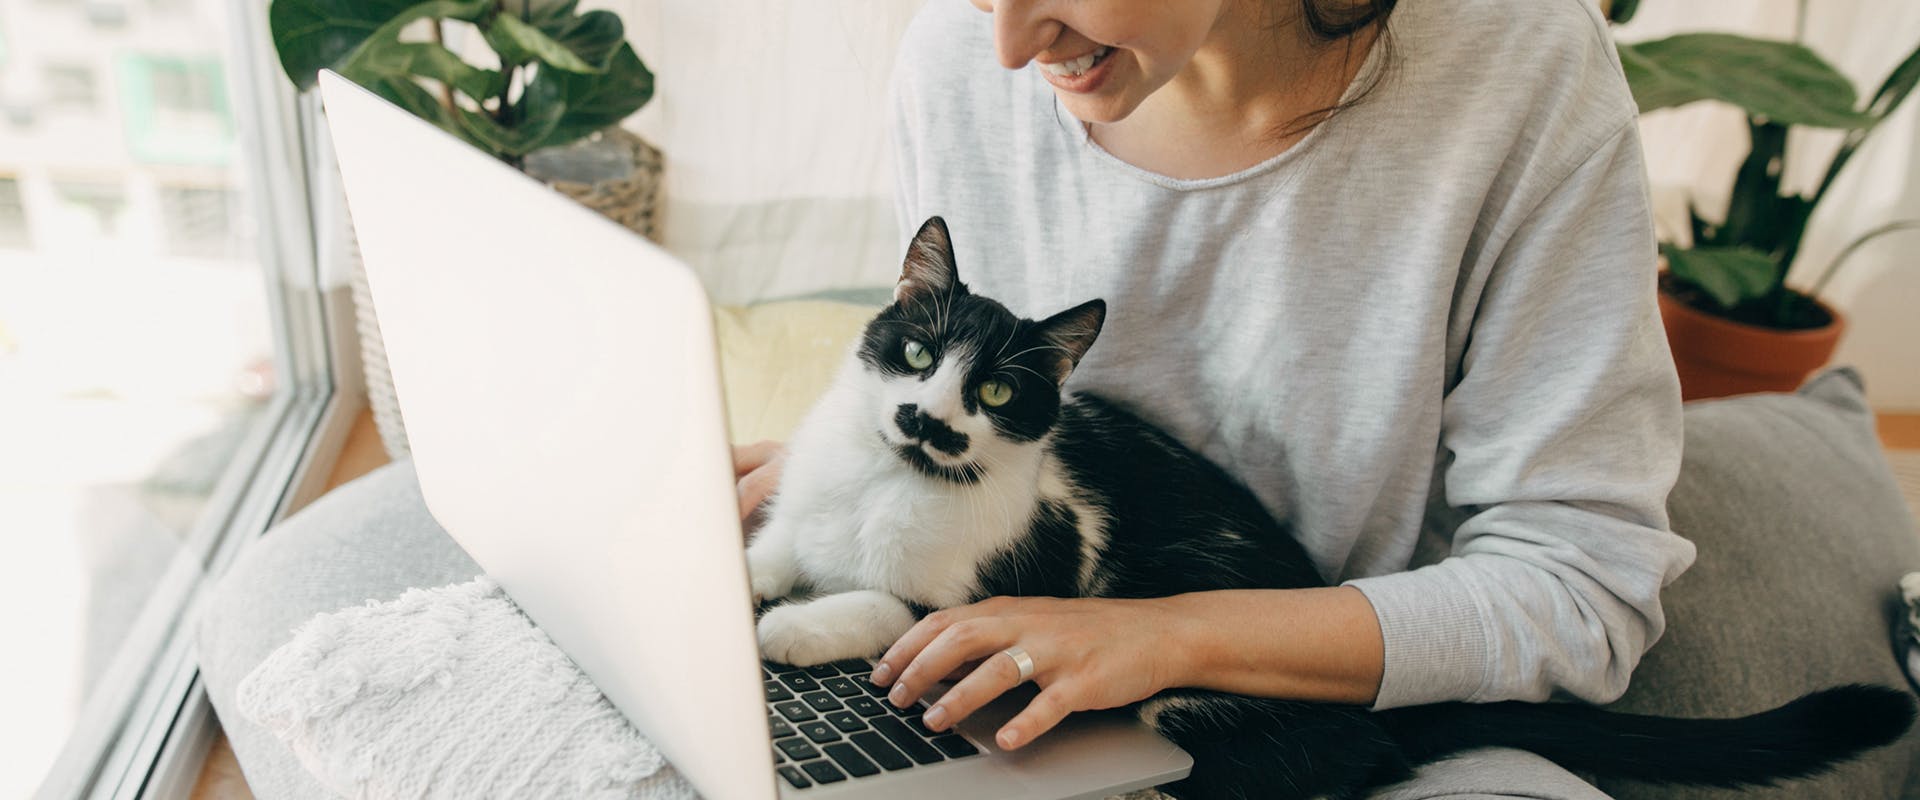 A woman working on her laptop, a cat sitting on her lap